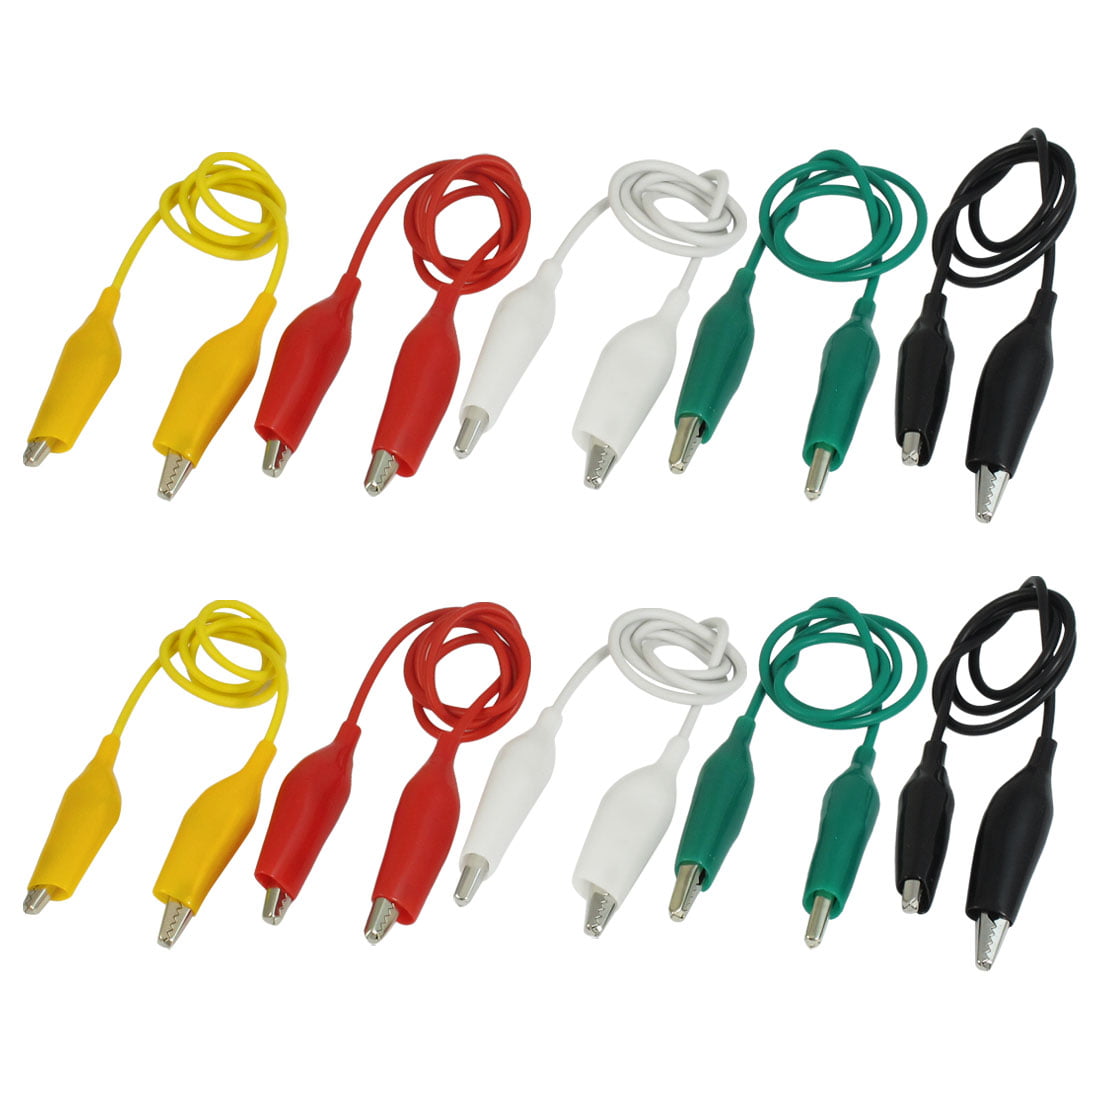 20 pcs  corded Alligator leads test clips Electrical Jumpers Wire Cable 50cm 